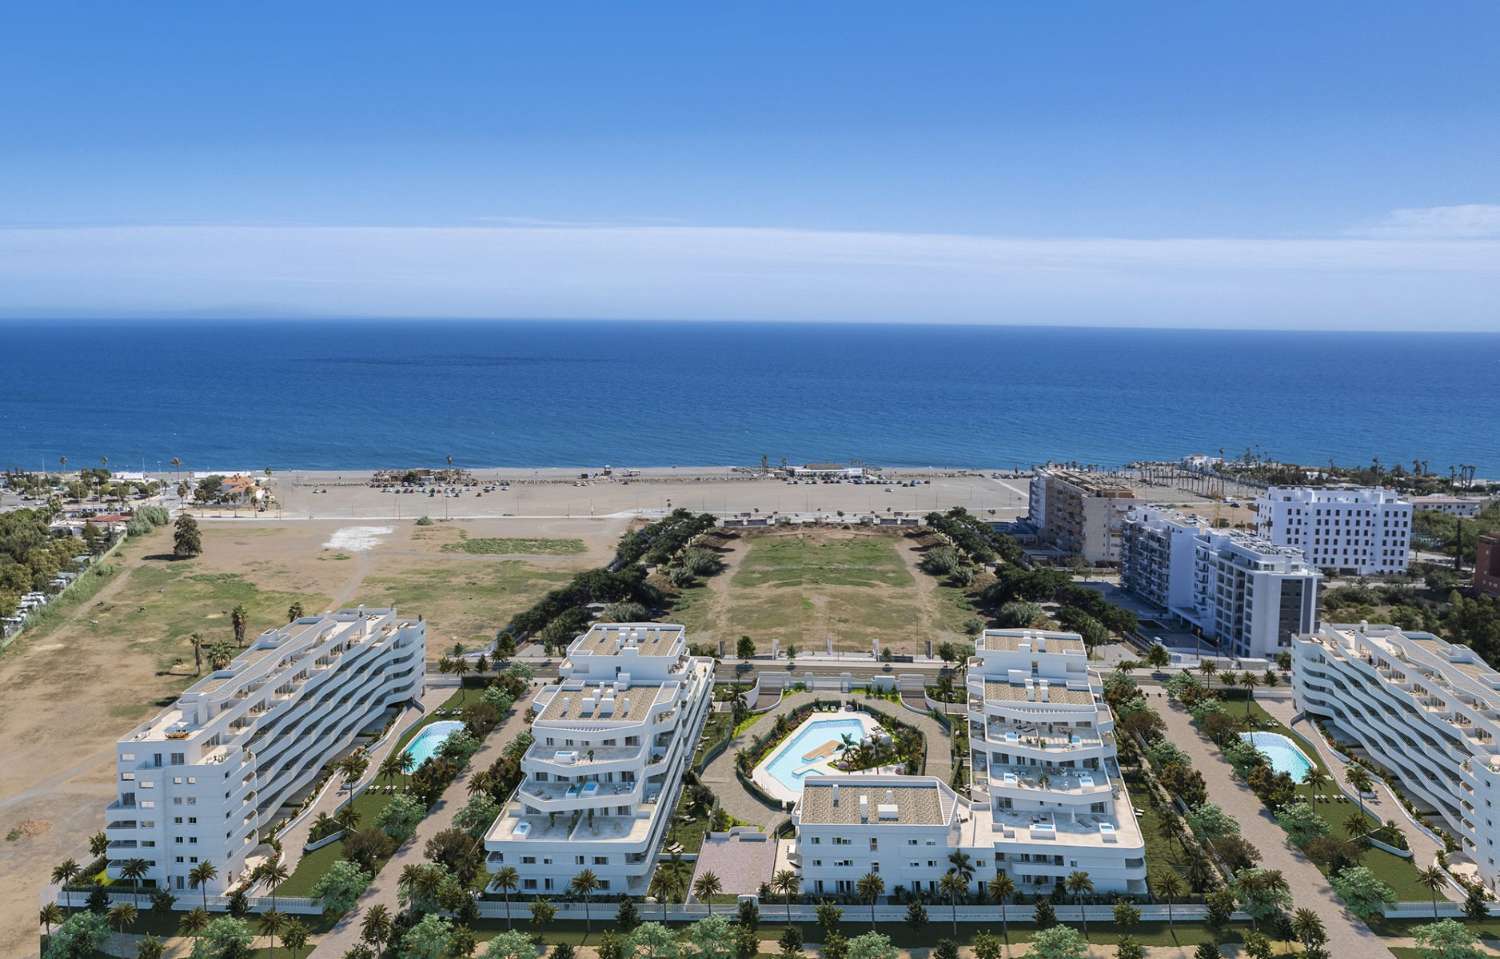 Newbuild apartments Torre del Mar for sale with 2 bedrooms, 2 bathrooms, a terrace with sea views and pool – € 285.000